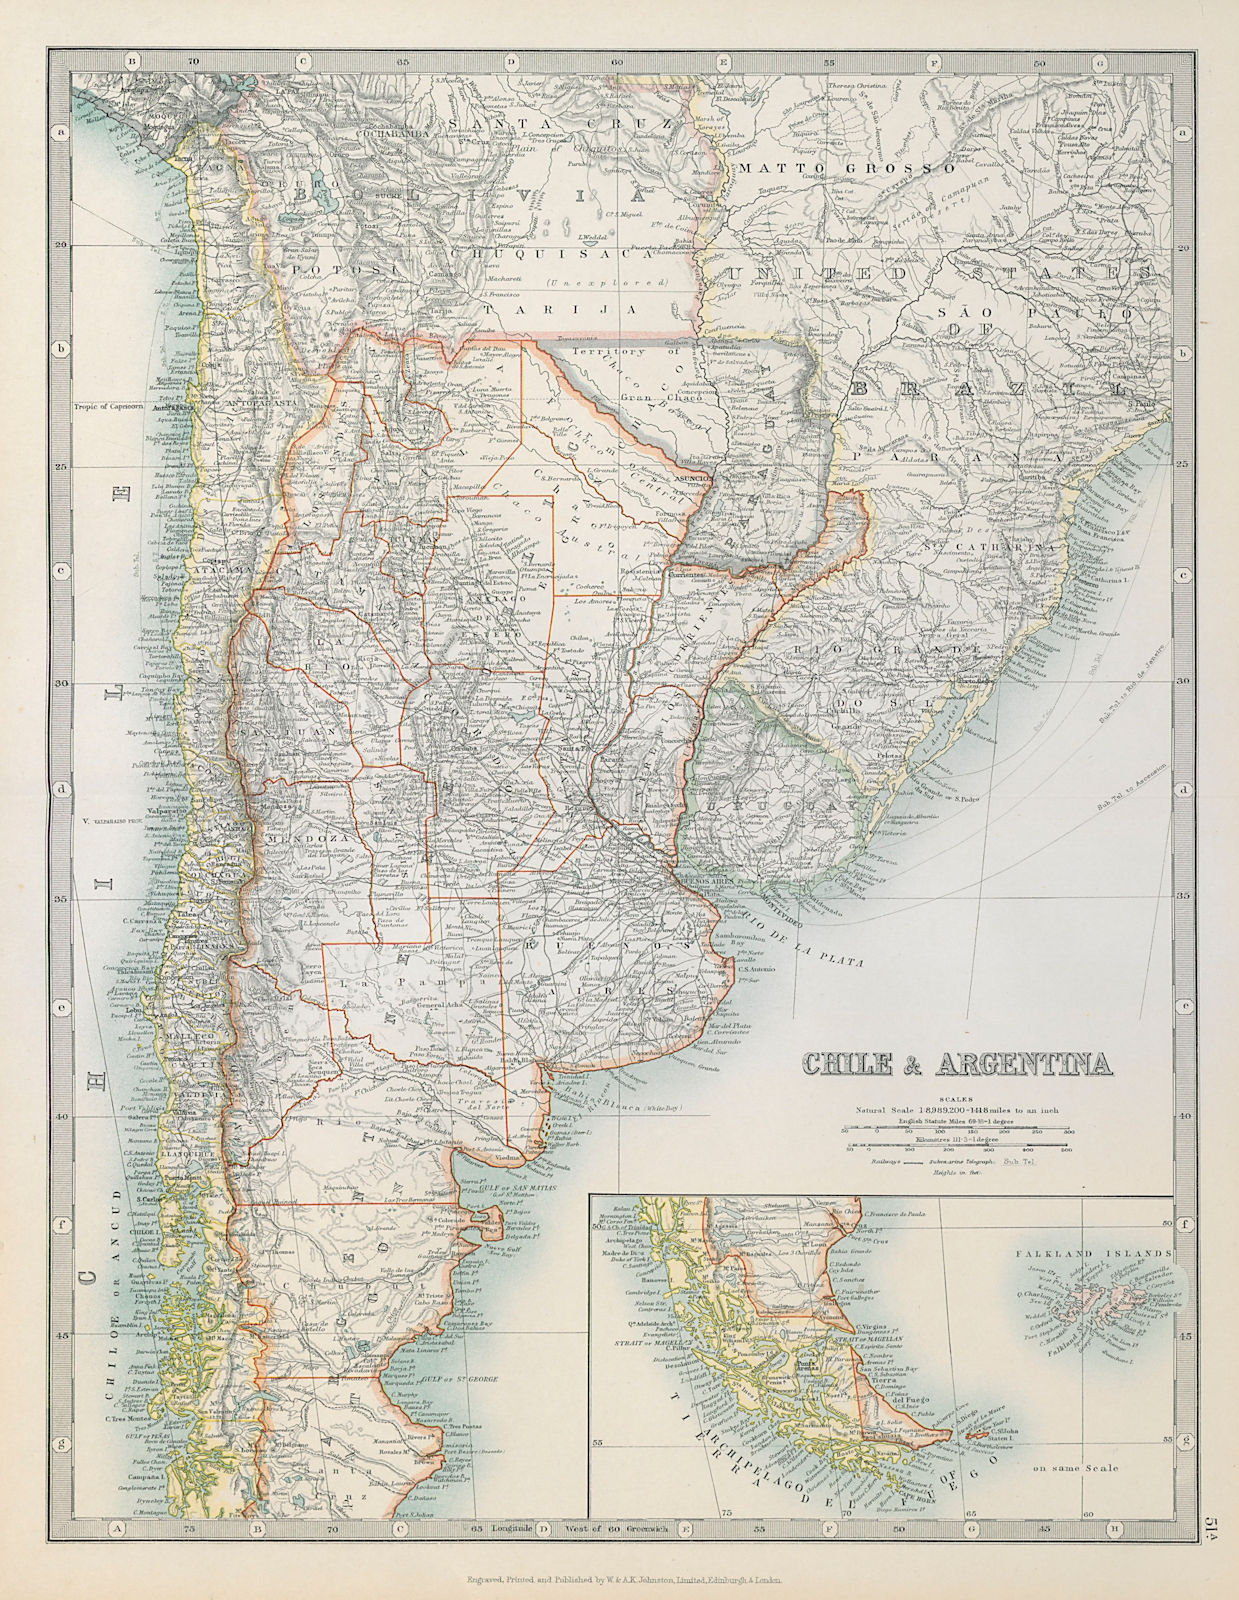 Associate Product CHILE & ARGENTINA. Paraguay/Bolivia ignored 1897 border. JOHNSTON 1915 old map